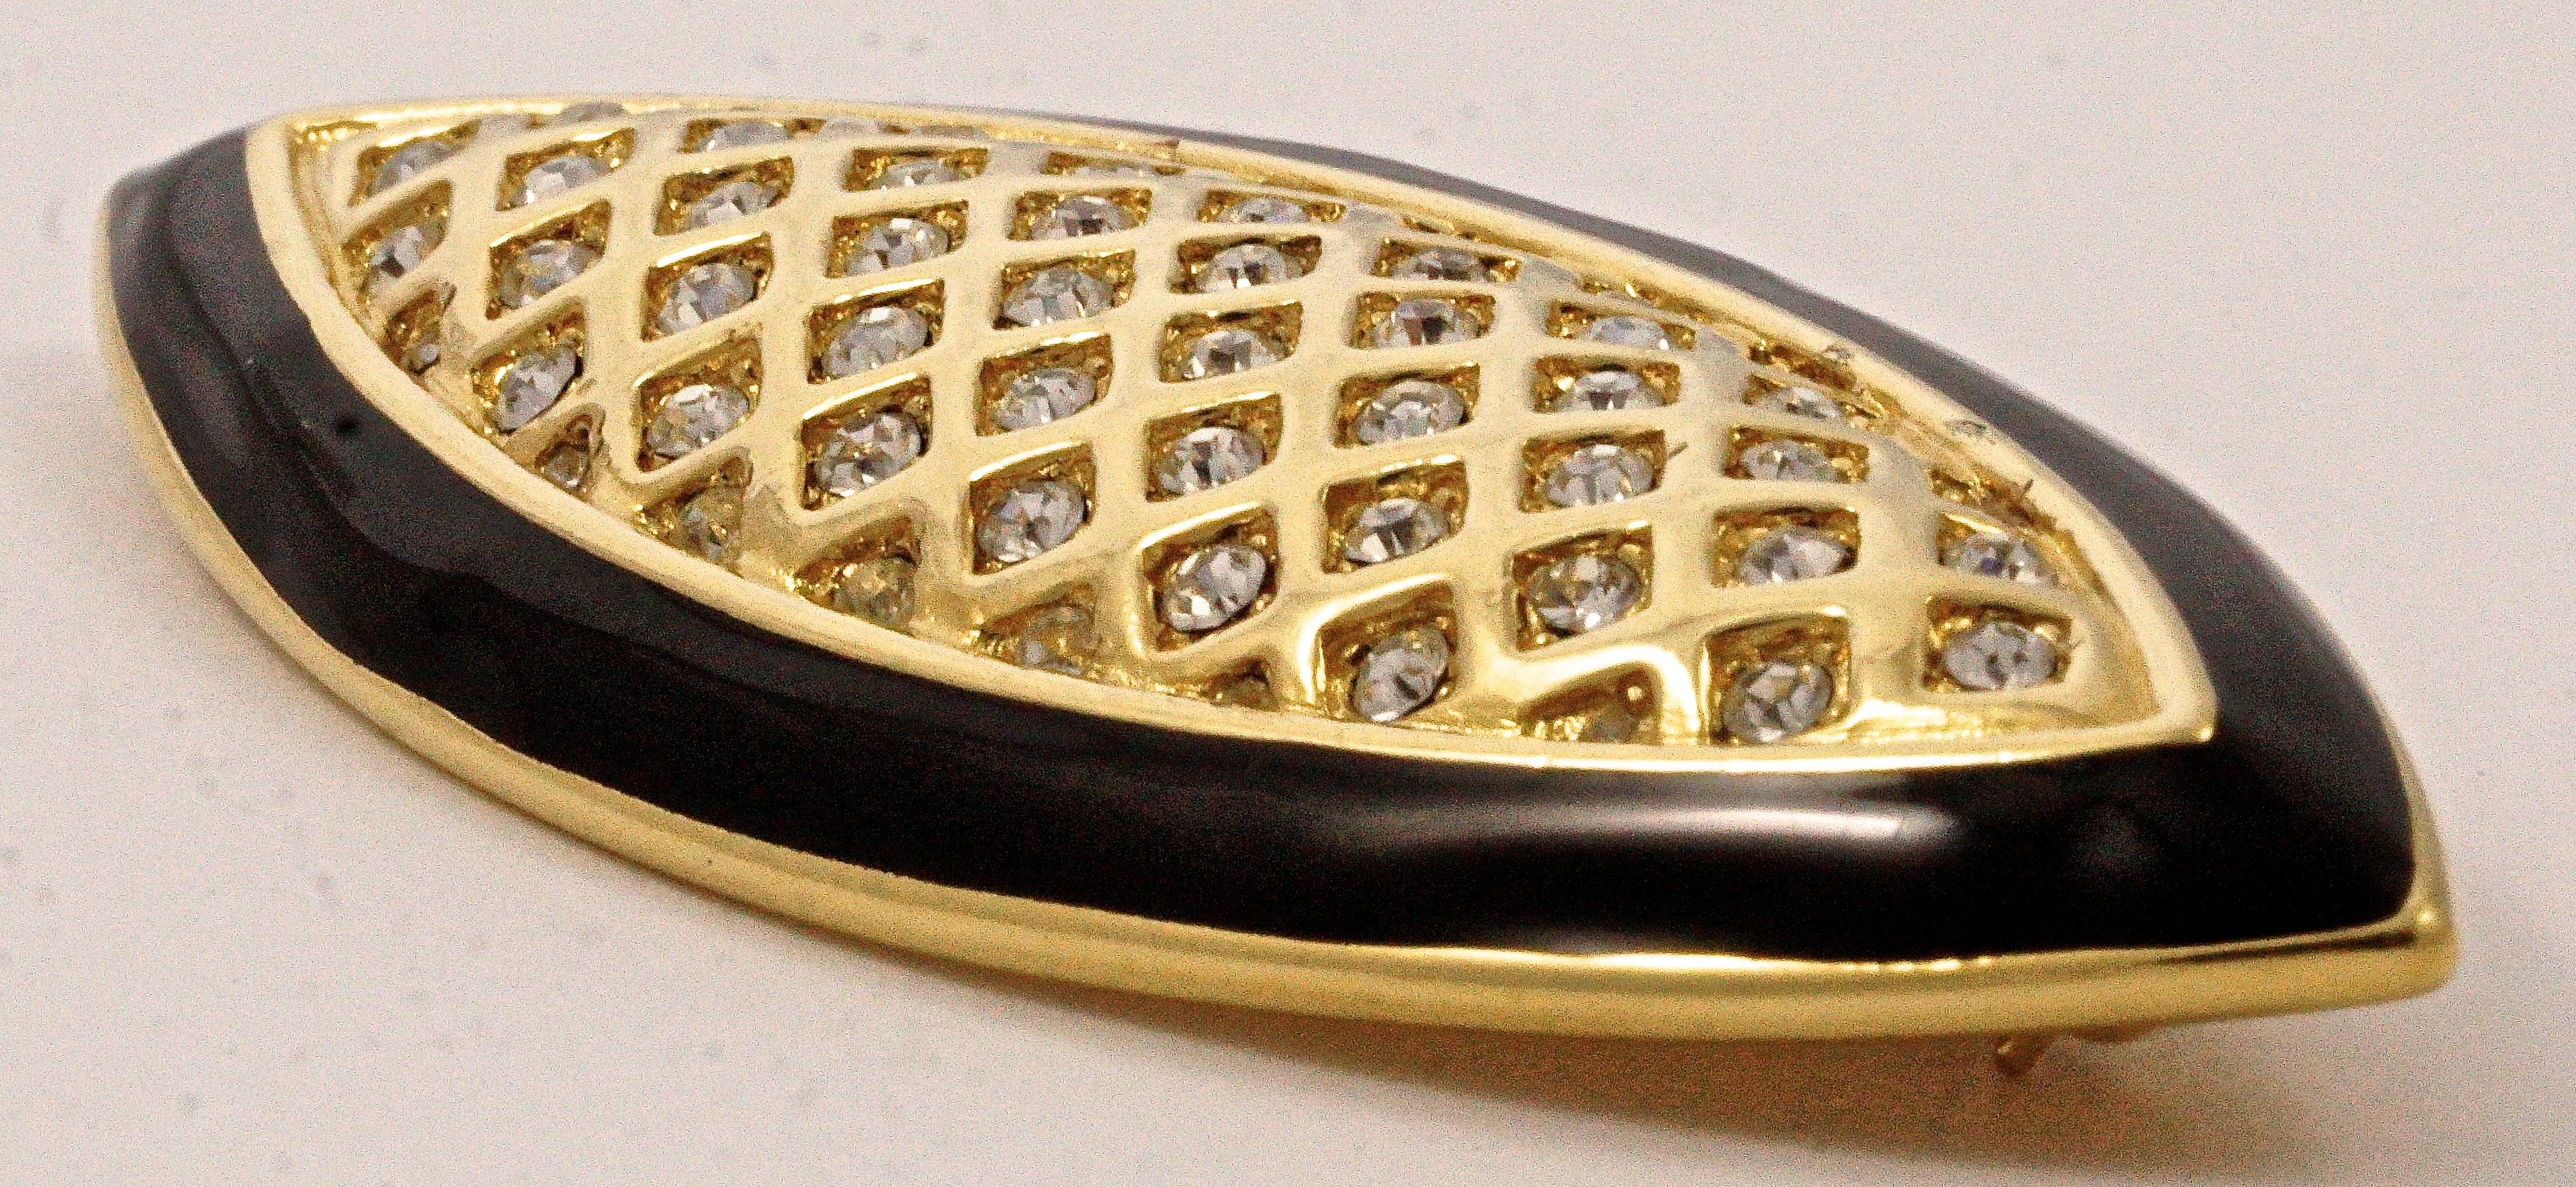 Stylish Monet gold tone brooch featuring rhinestones set in diamond shape latticework with a black enamel edging. Measuring length 7.1cm / 2.79 inches by width 2.7cm / 1.06 inches. The brooch is in very good condition.

This is an elegant and